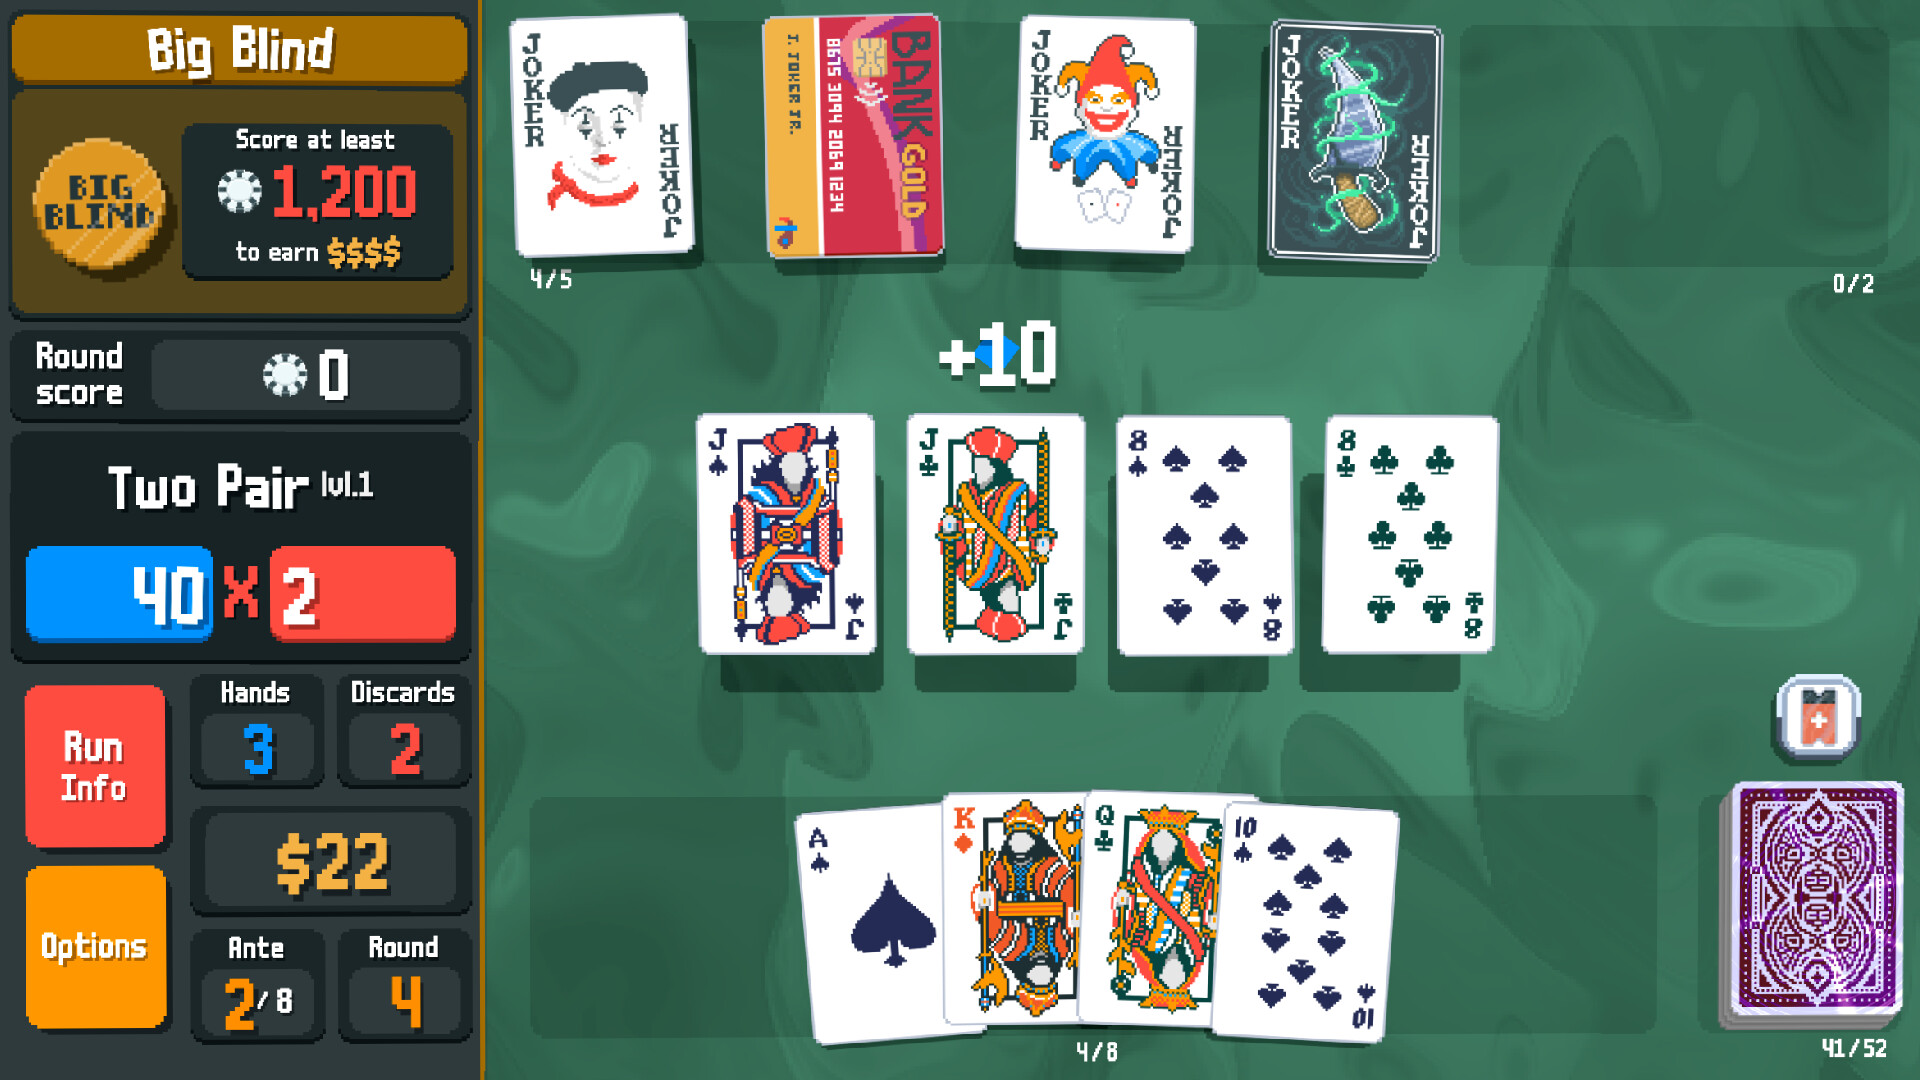 A screenshot from the video game "Balatro:" playing cards on a green background